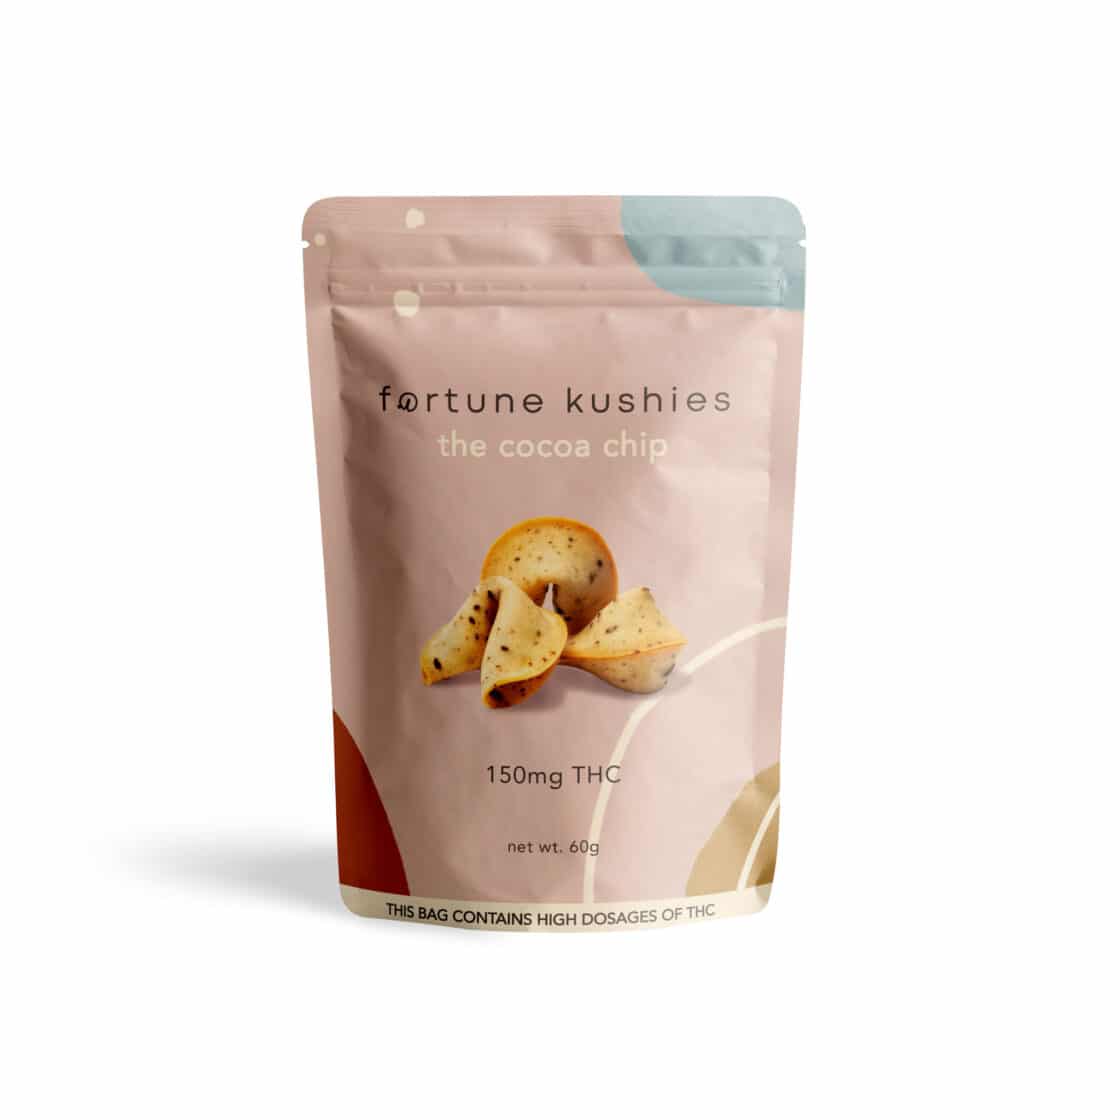 Fortune Kushies The Cocoa Chip